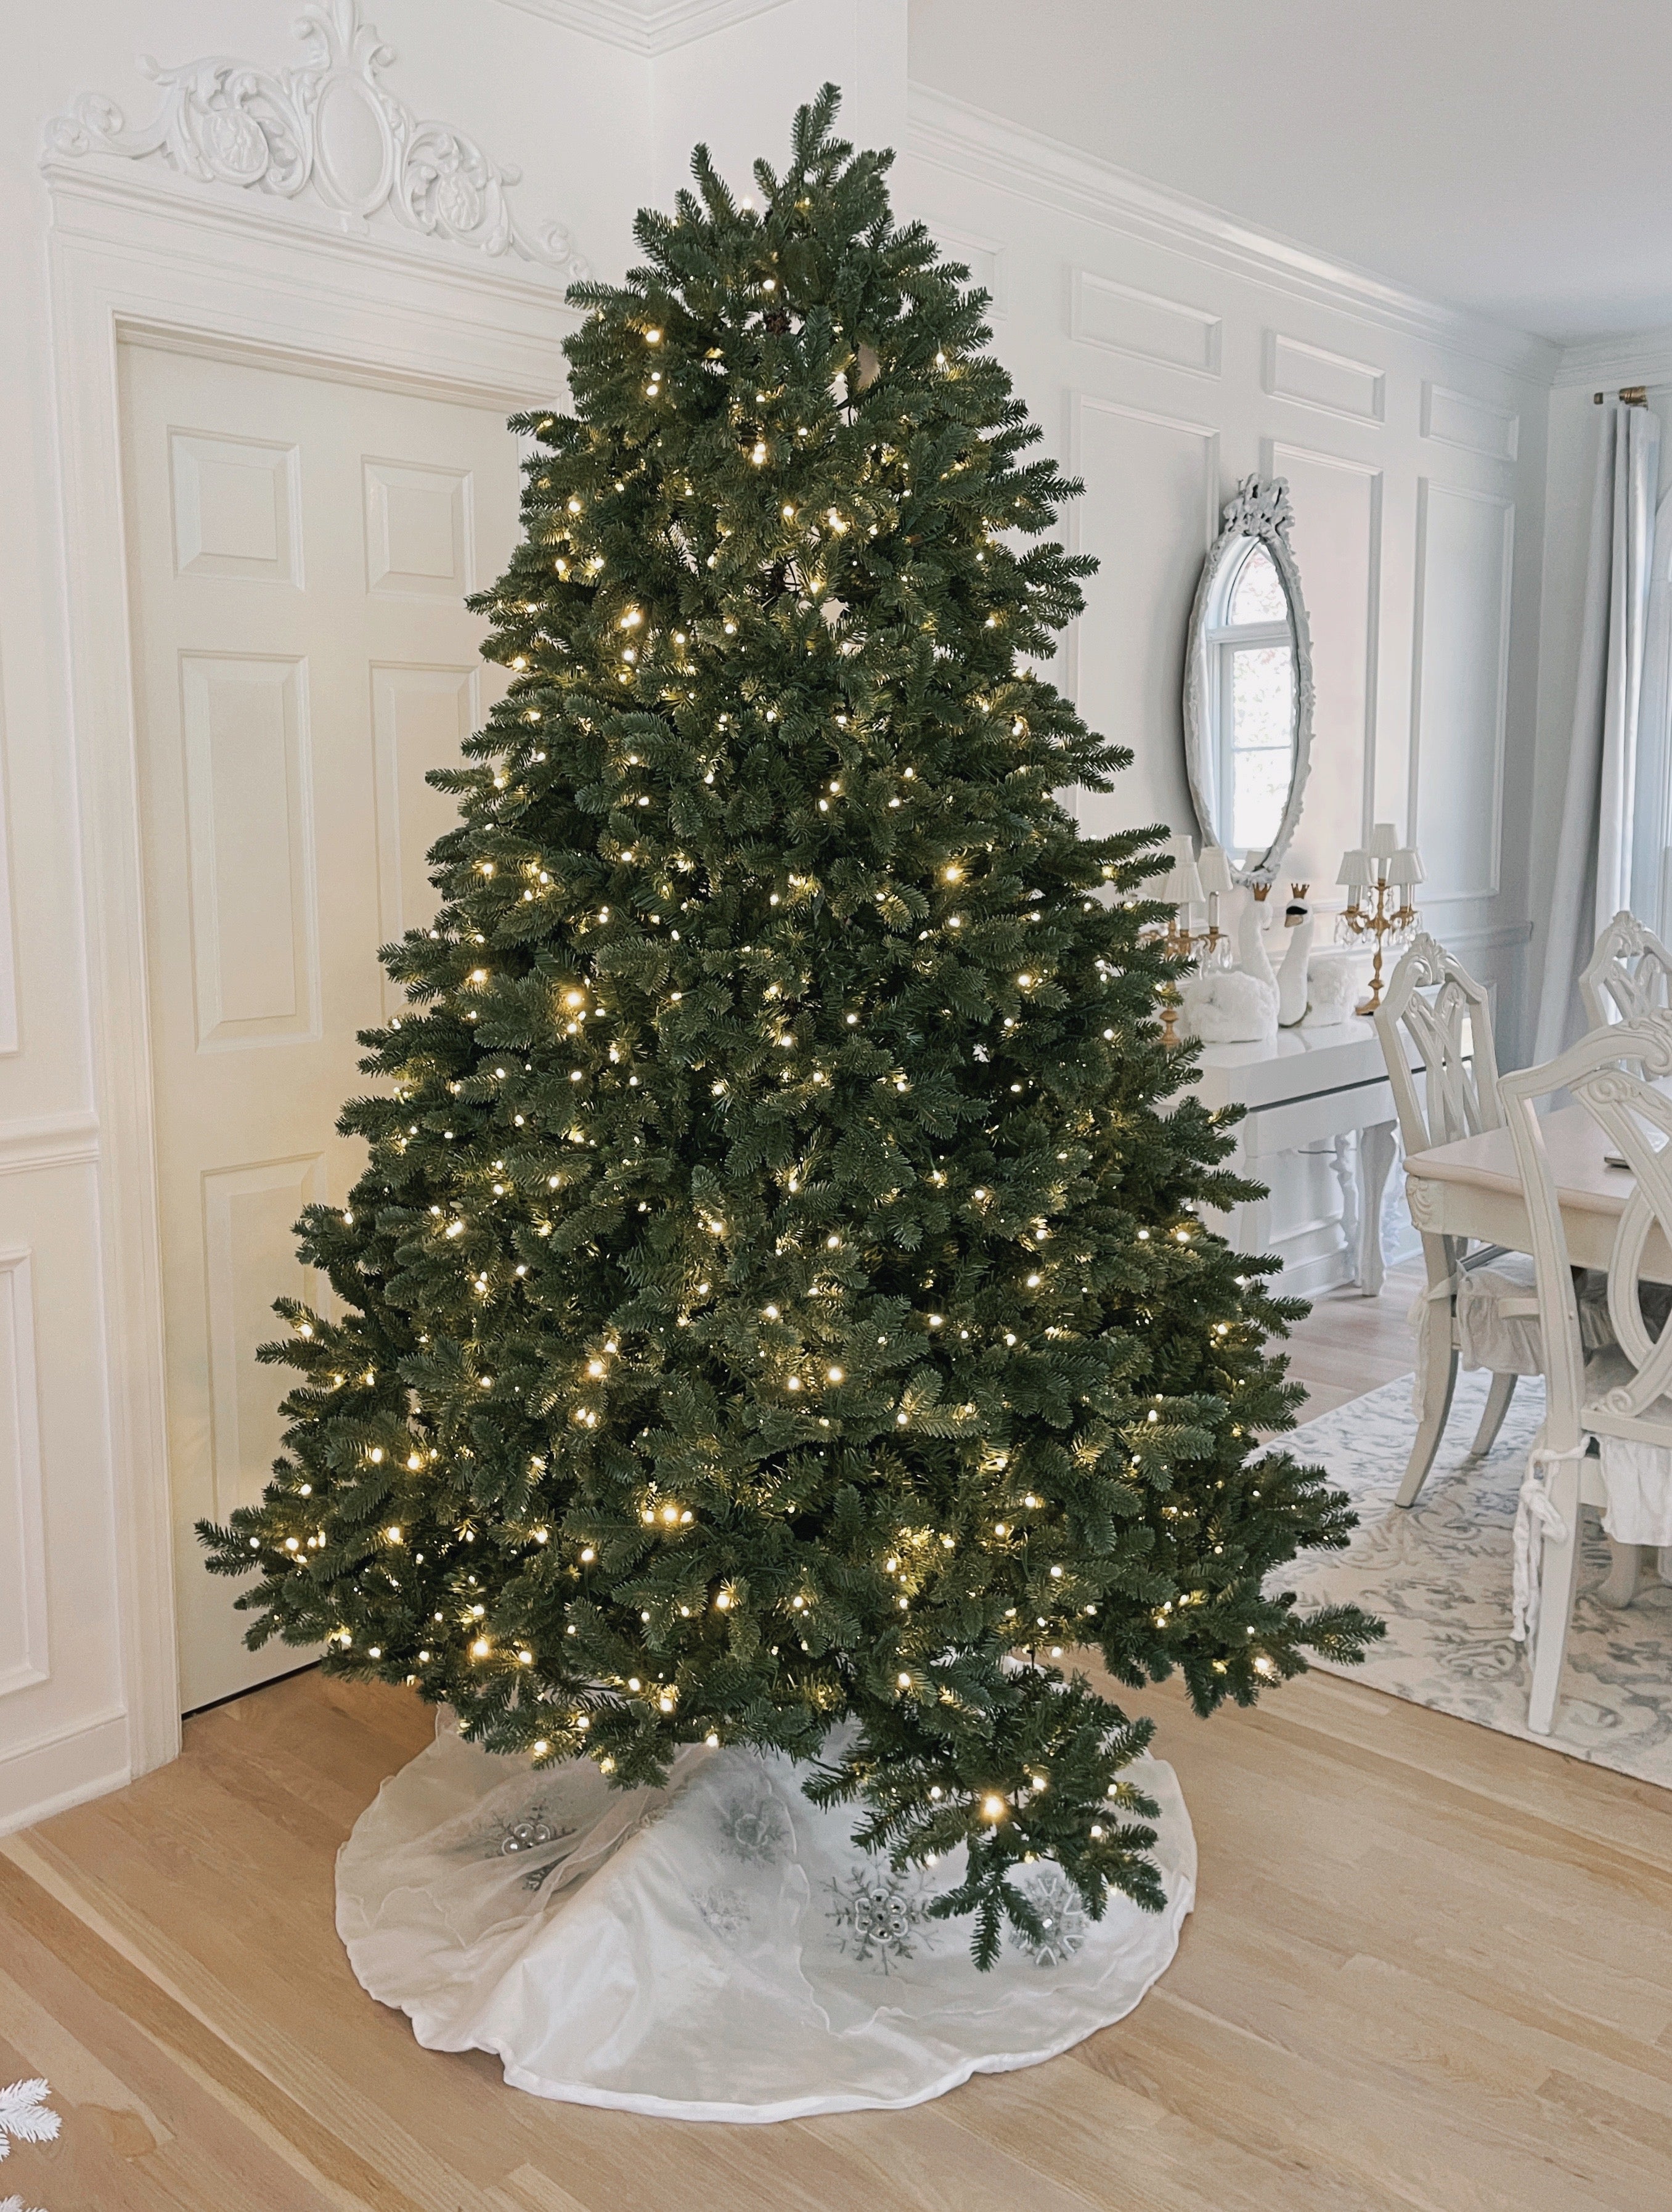 King of Christmas 9' Aspen Fir Quick-Shape Tree with 2000 Warm White & Multi-Color LED Lights